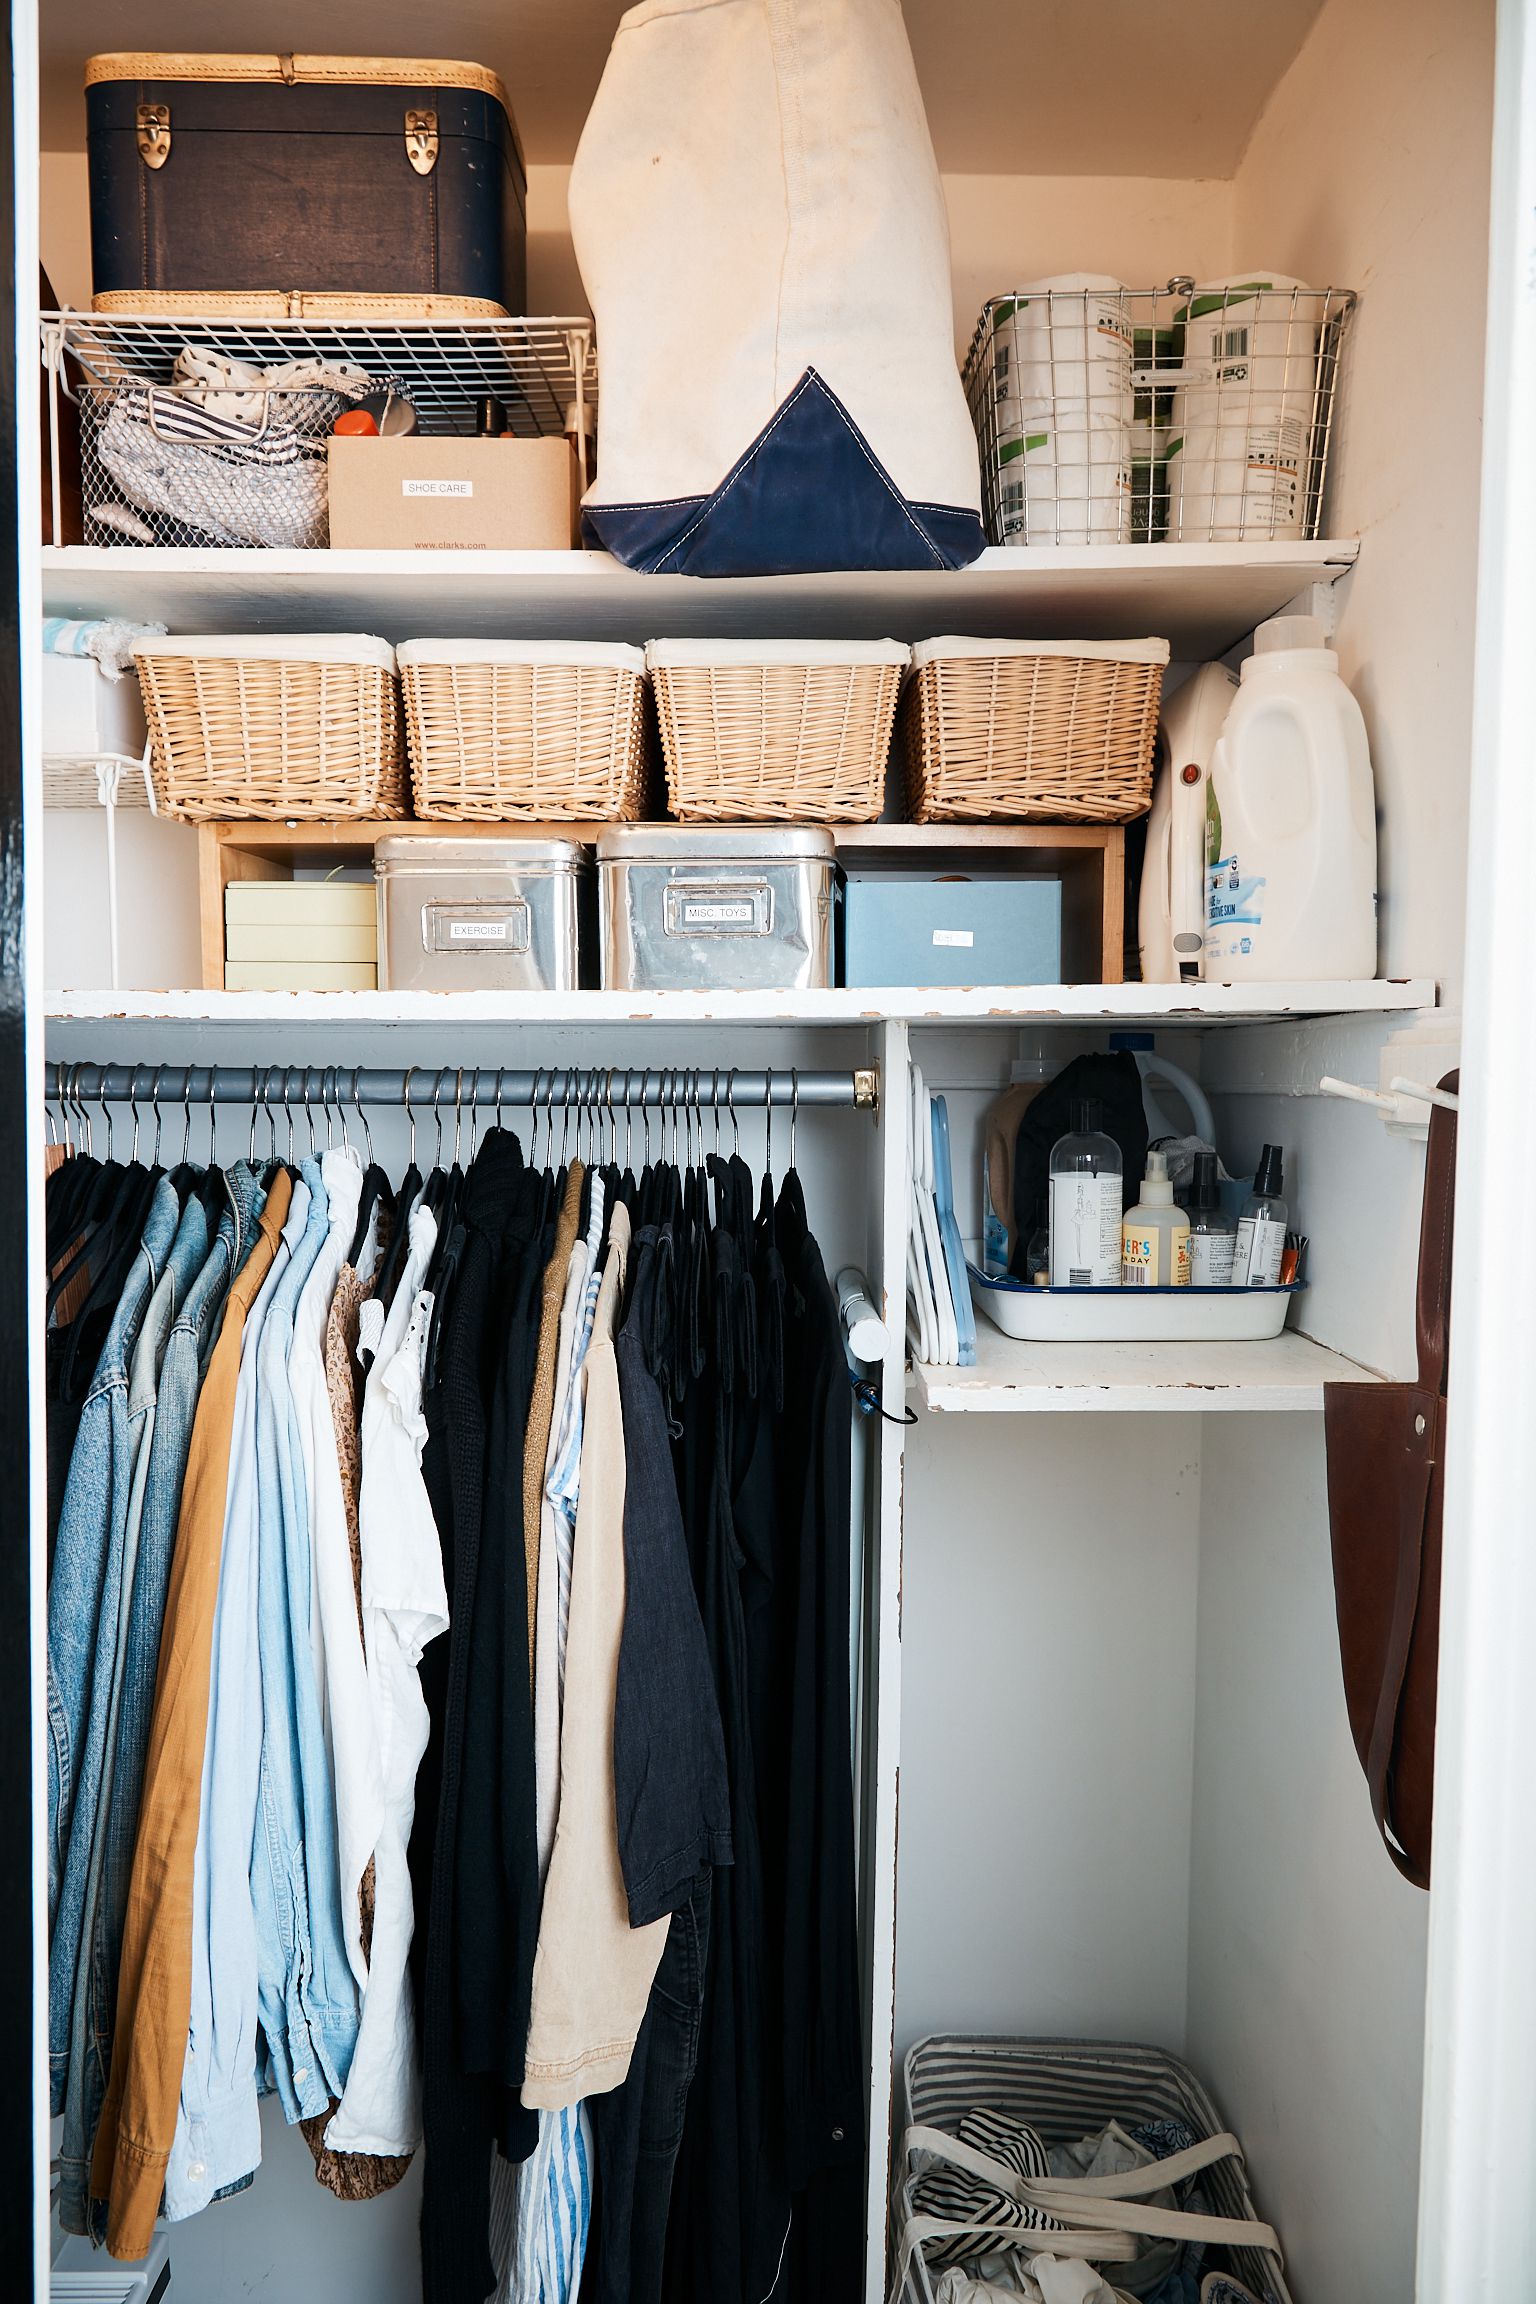 I Overhauled My Family’s Messy Closet—With a $0 Budget